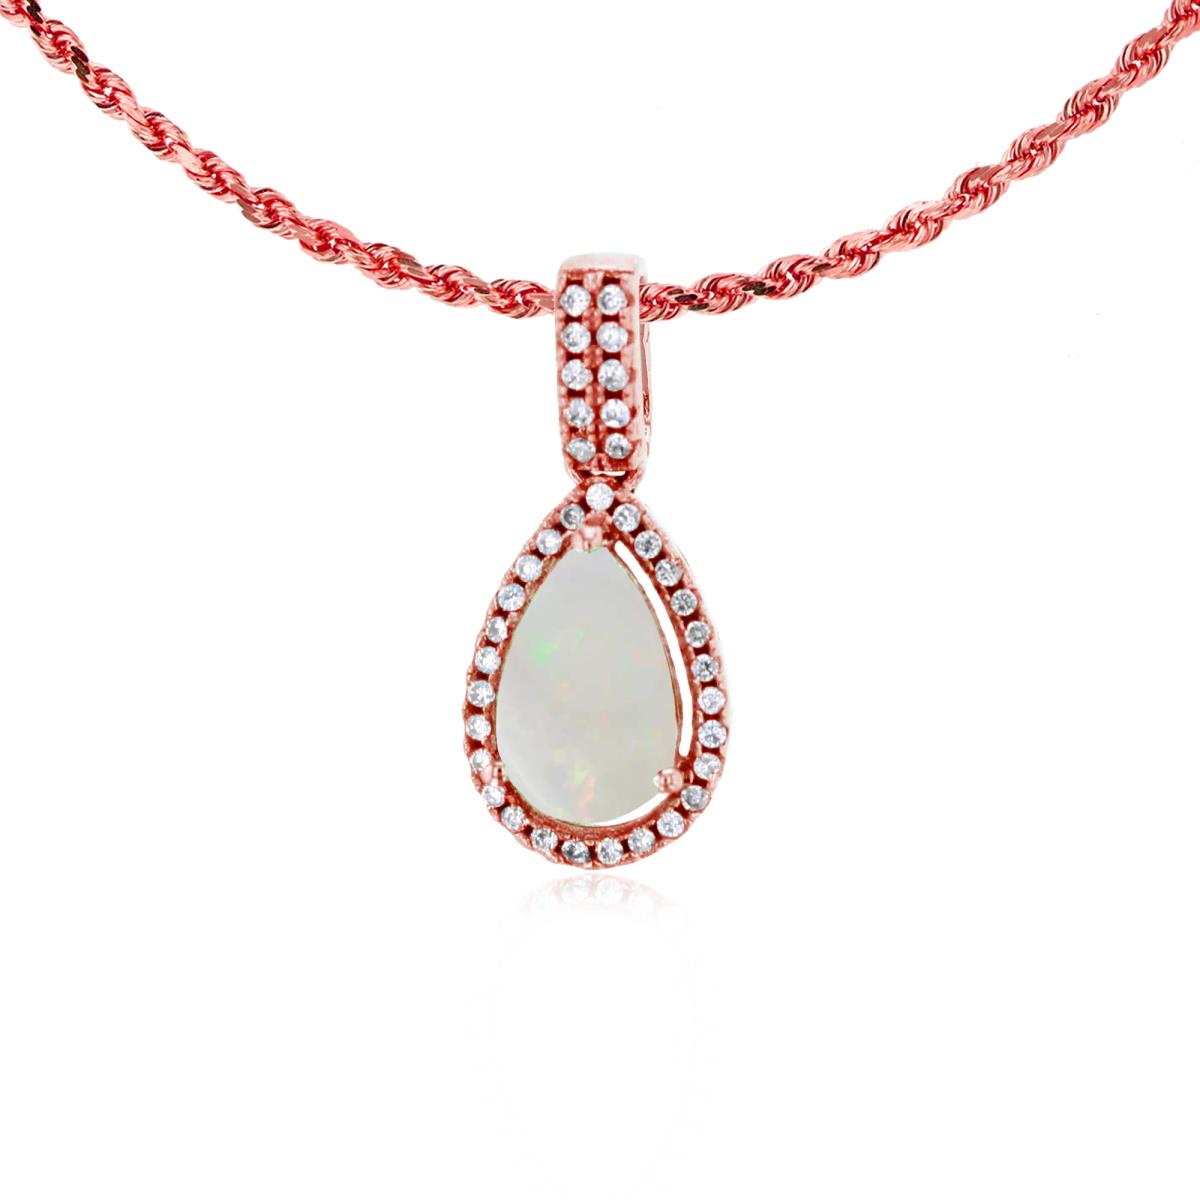 10K Rose Gold 8x5mm Pear Cut Opal & 0.11 CTTW Diamond Halo 18" Rope Chain Necklace